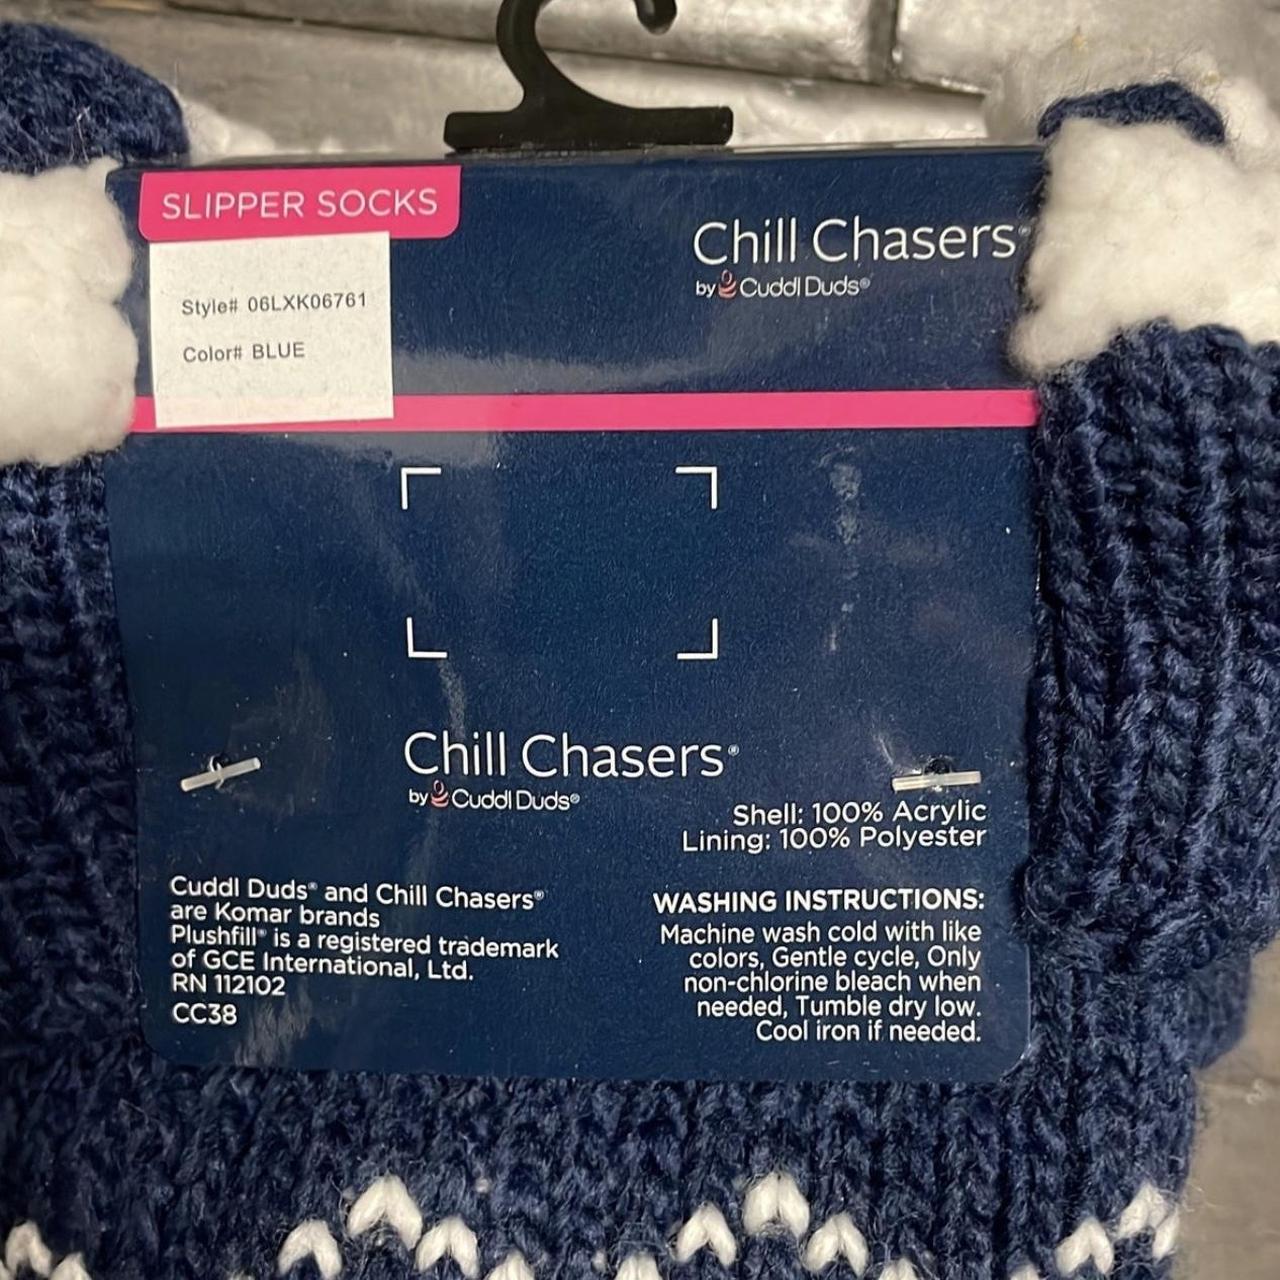 Chill Chasers By Cuddl Duds